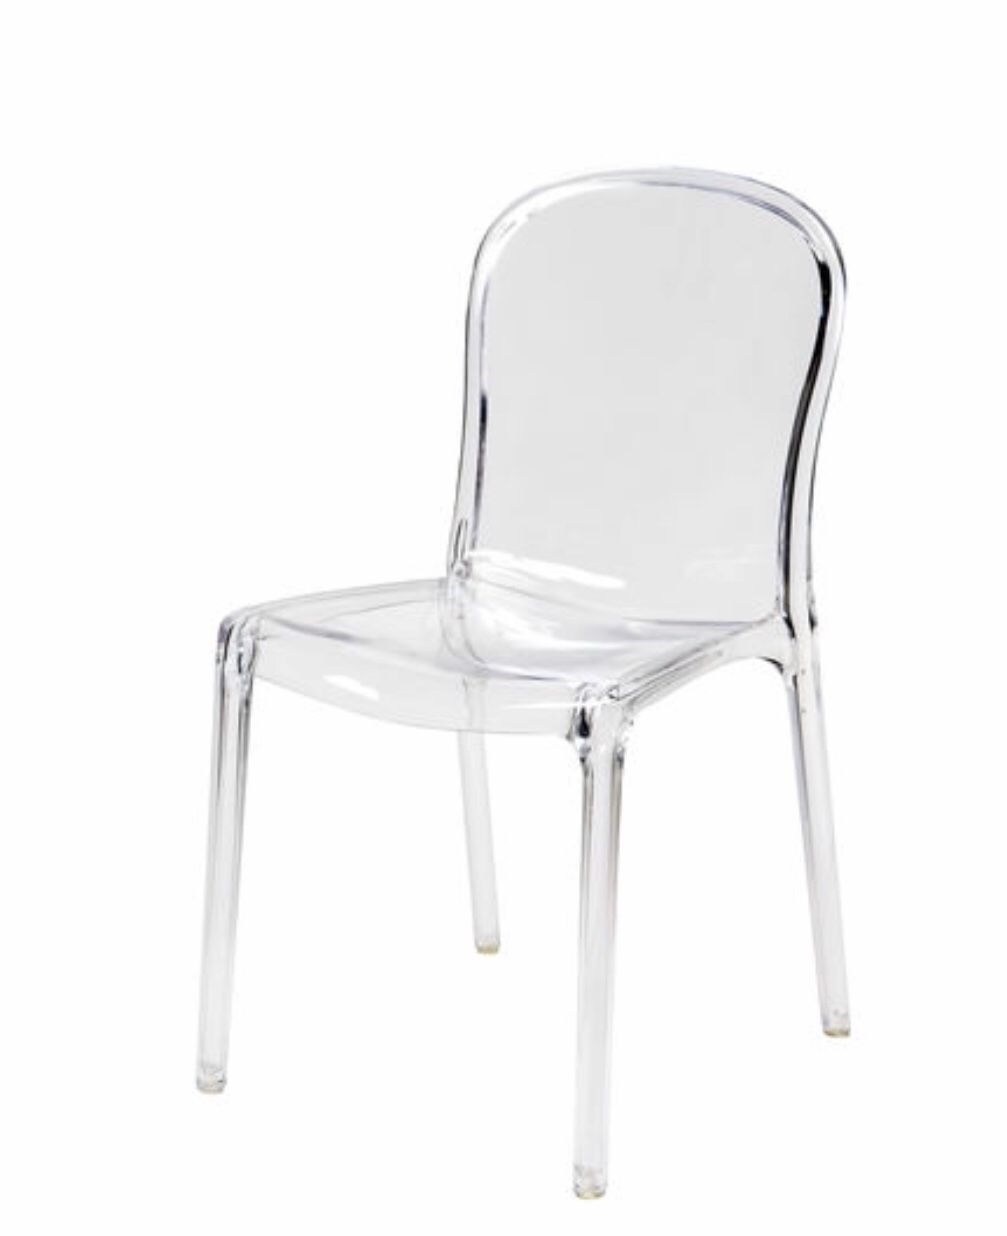 Polycarbonate dining chair clear,heavy duty